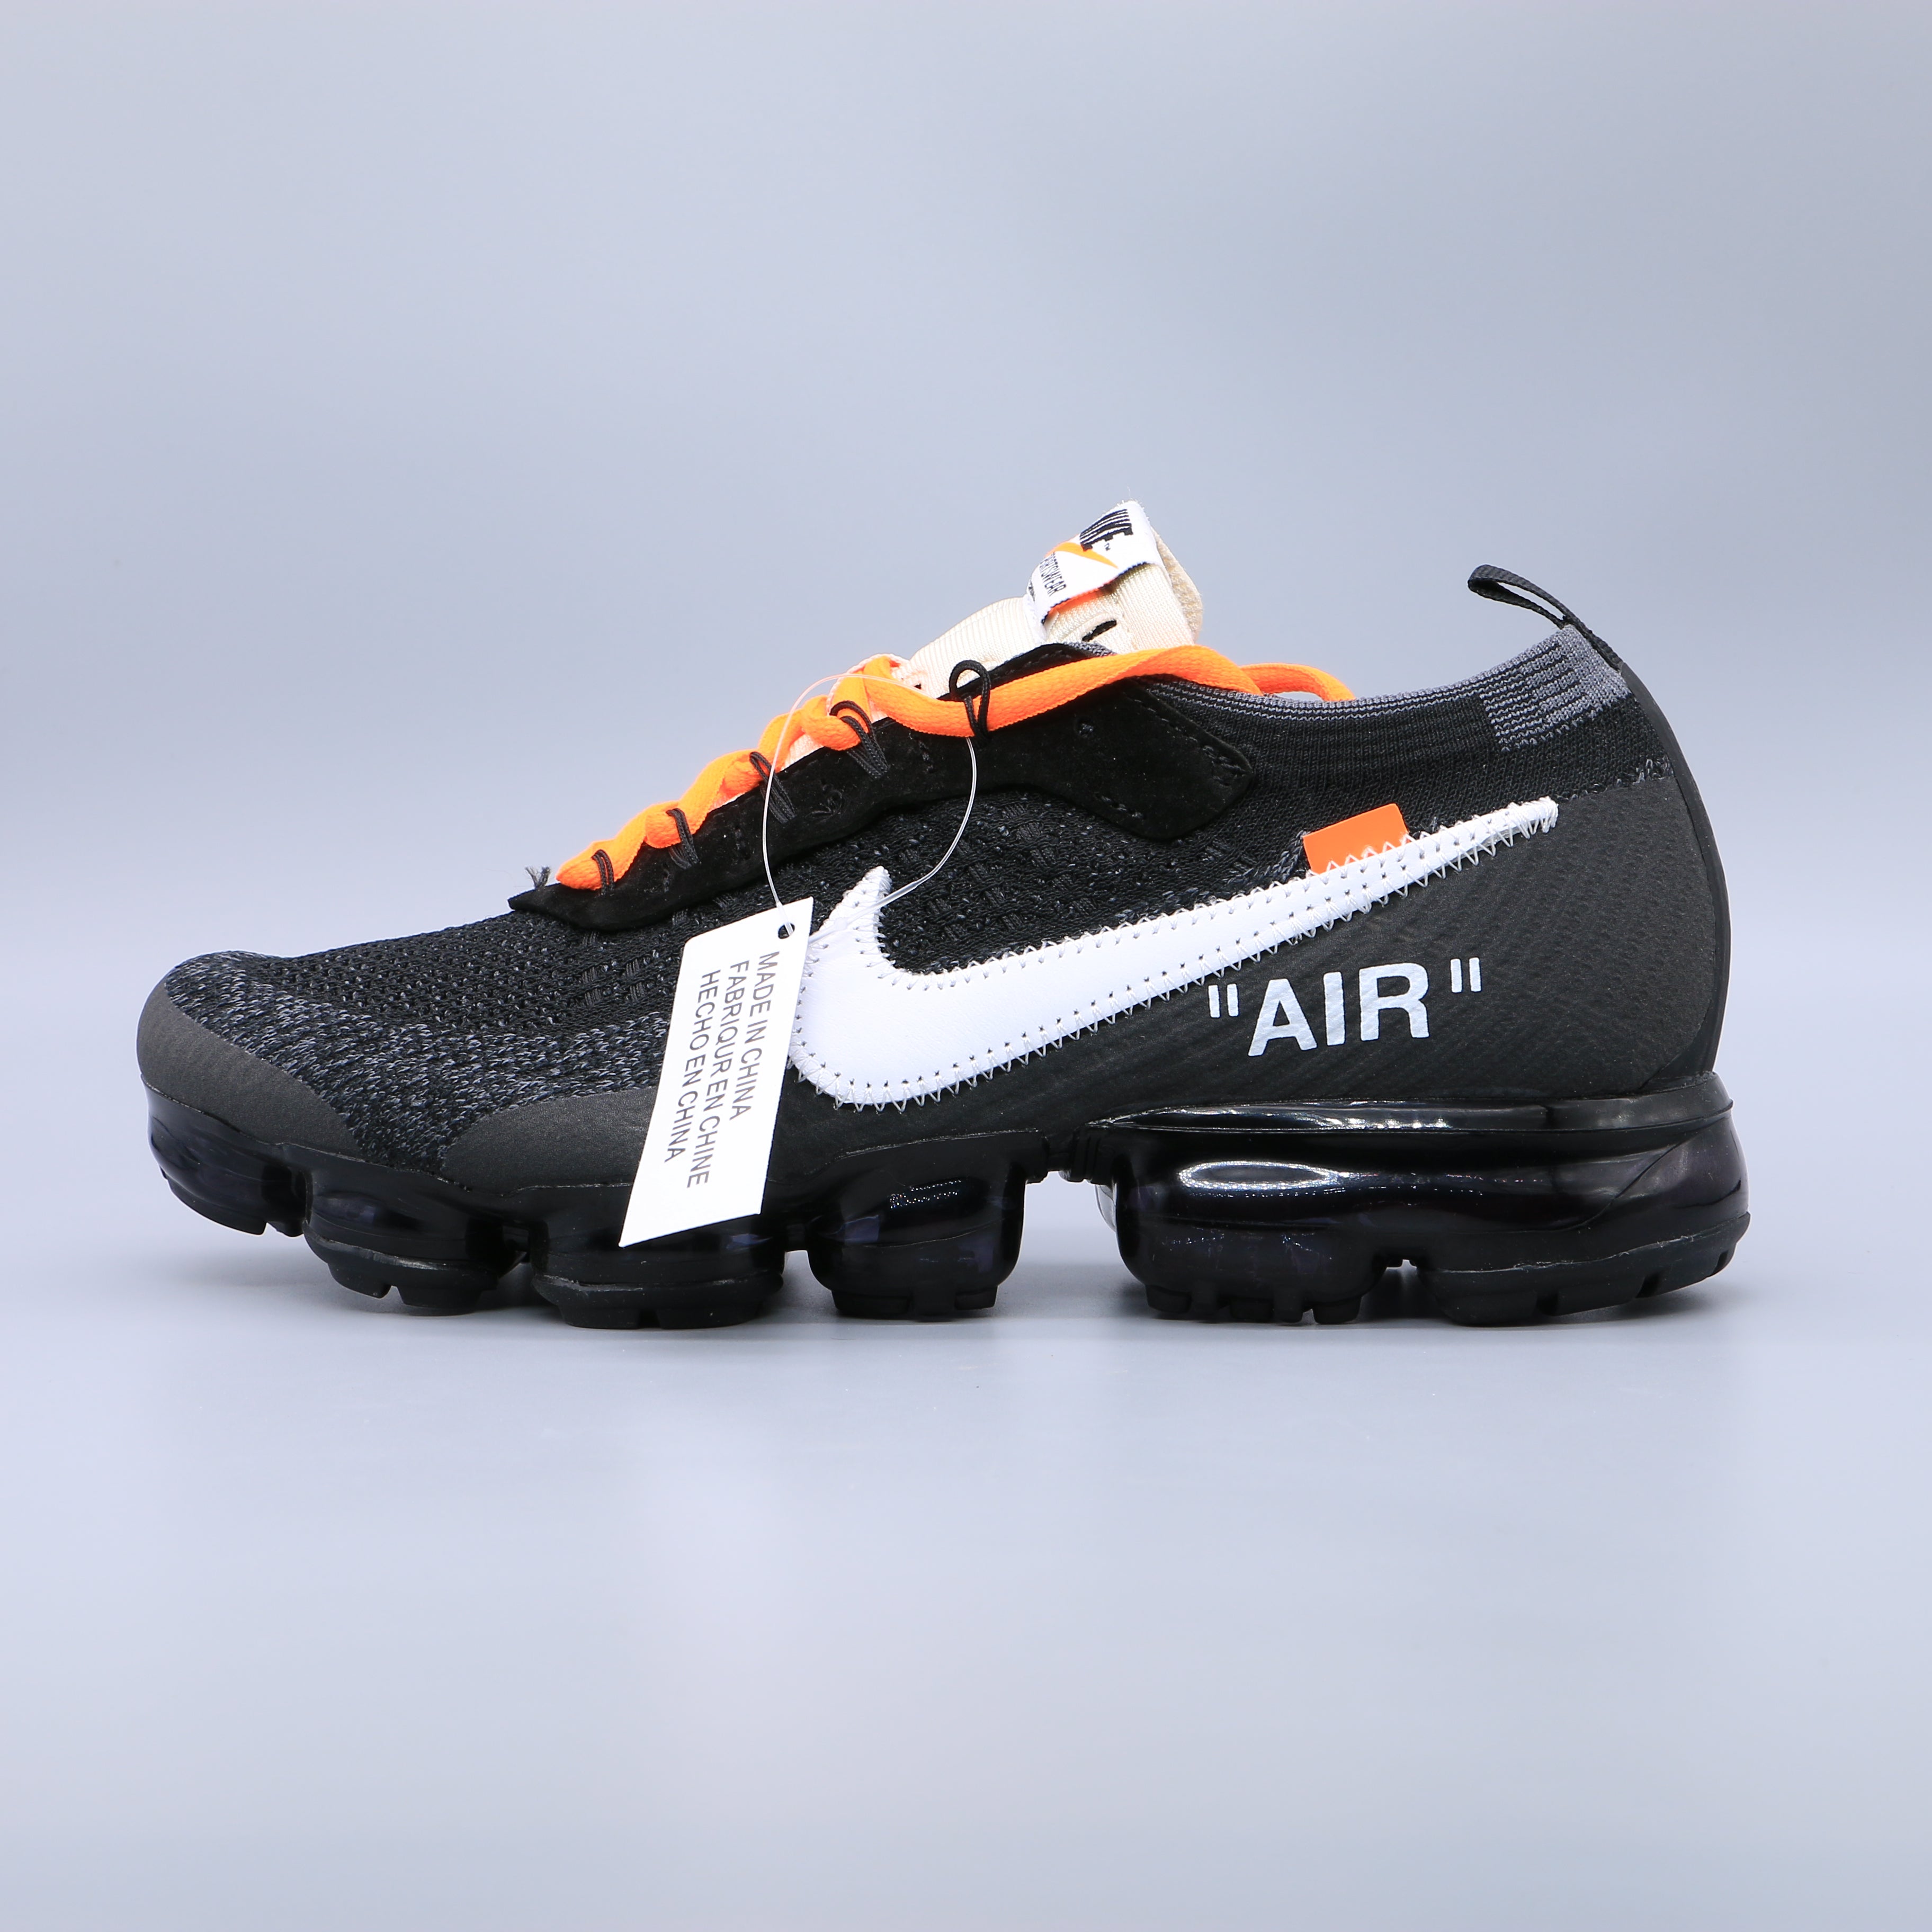 Off-White Co-Branded VaporMax Full Sole Air Cushion